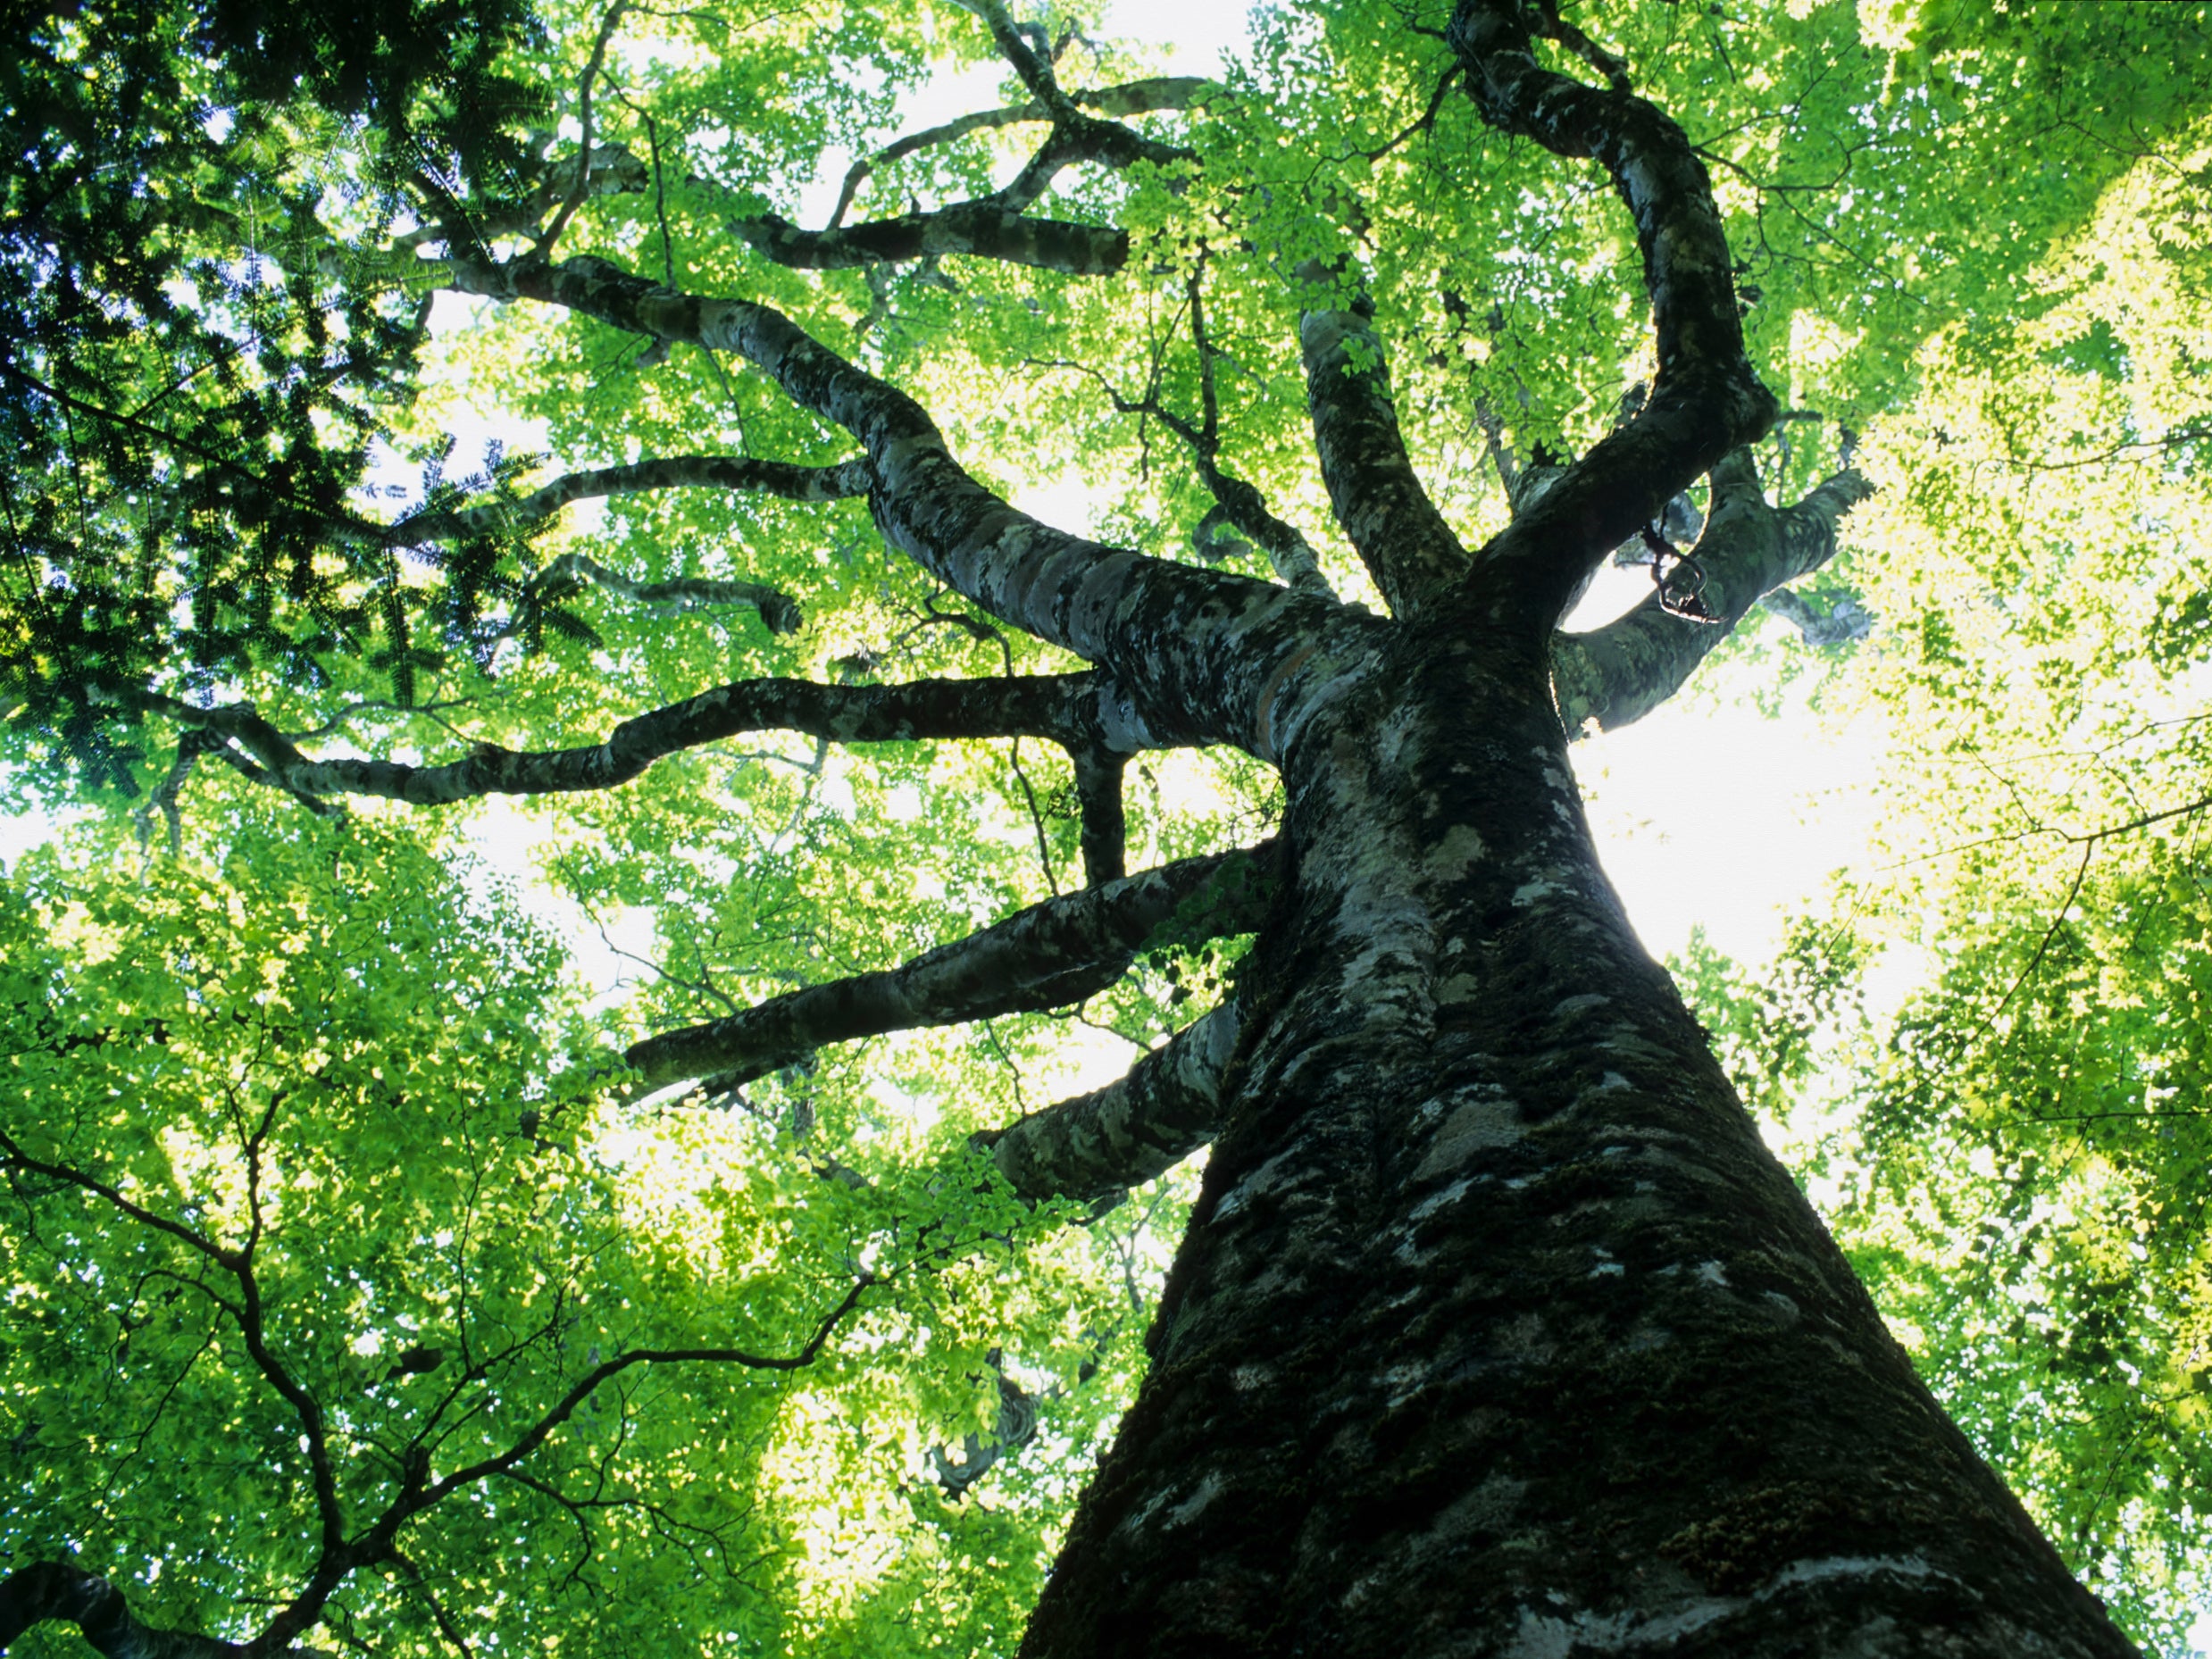 Ancient trees play crucial role in long-term survival of forest, study finds